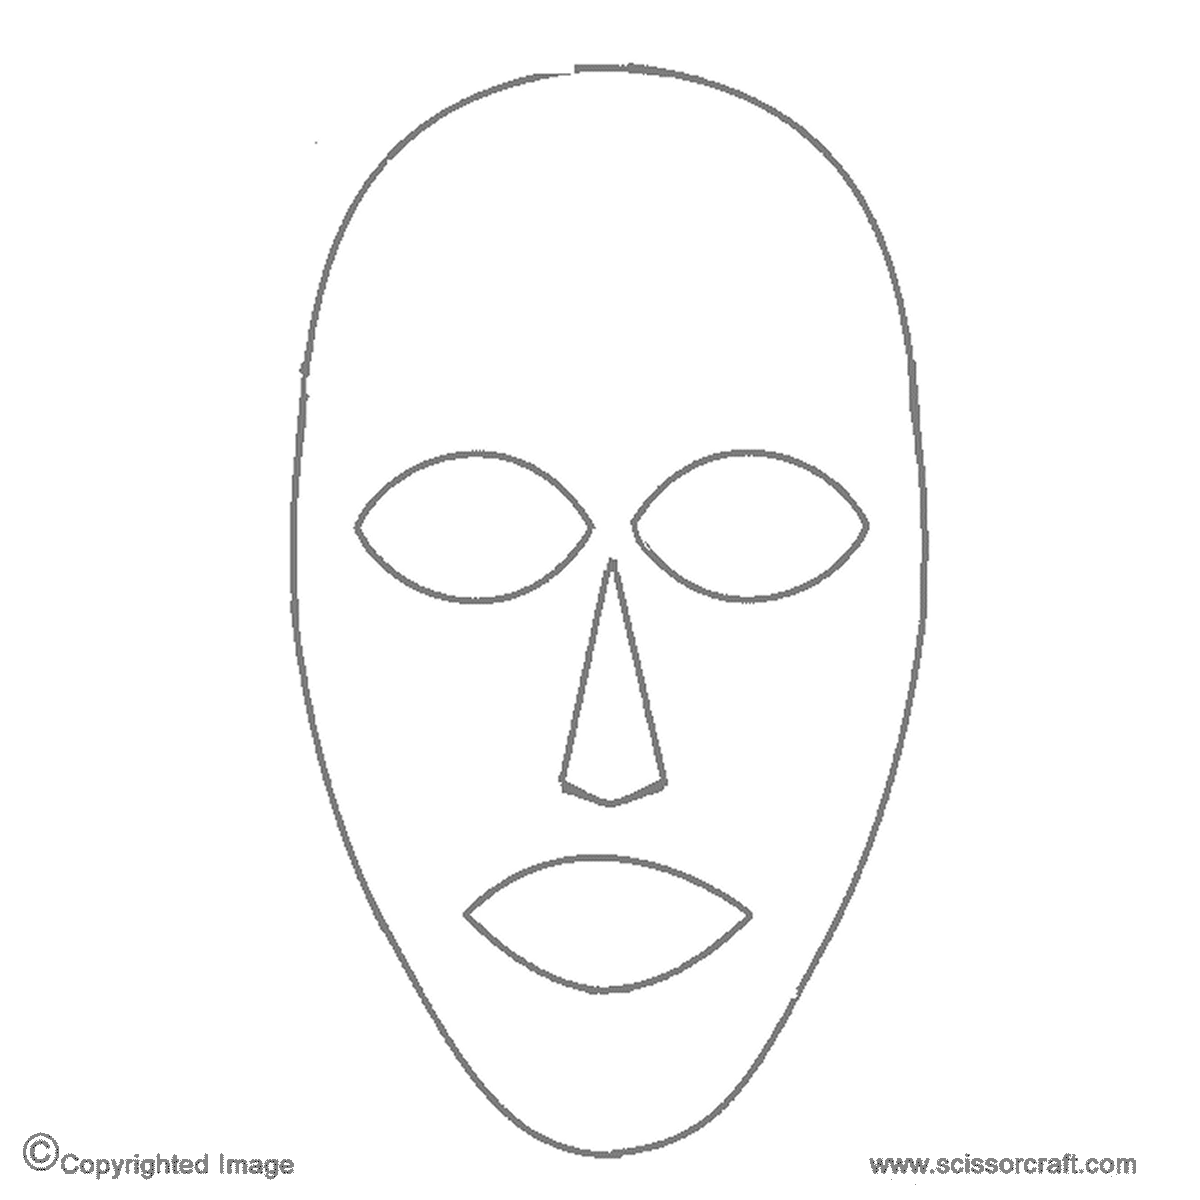 5 Best Images of Blank Face Printable Mask Template Full Face Mask